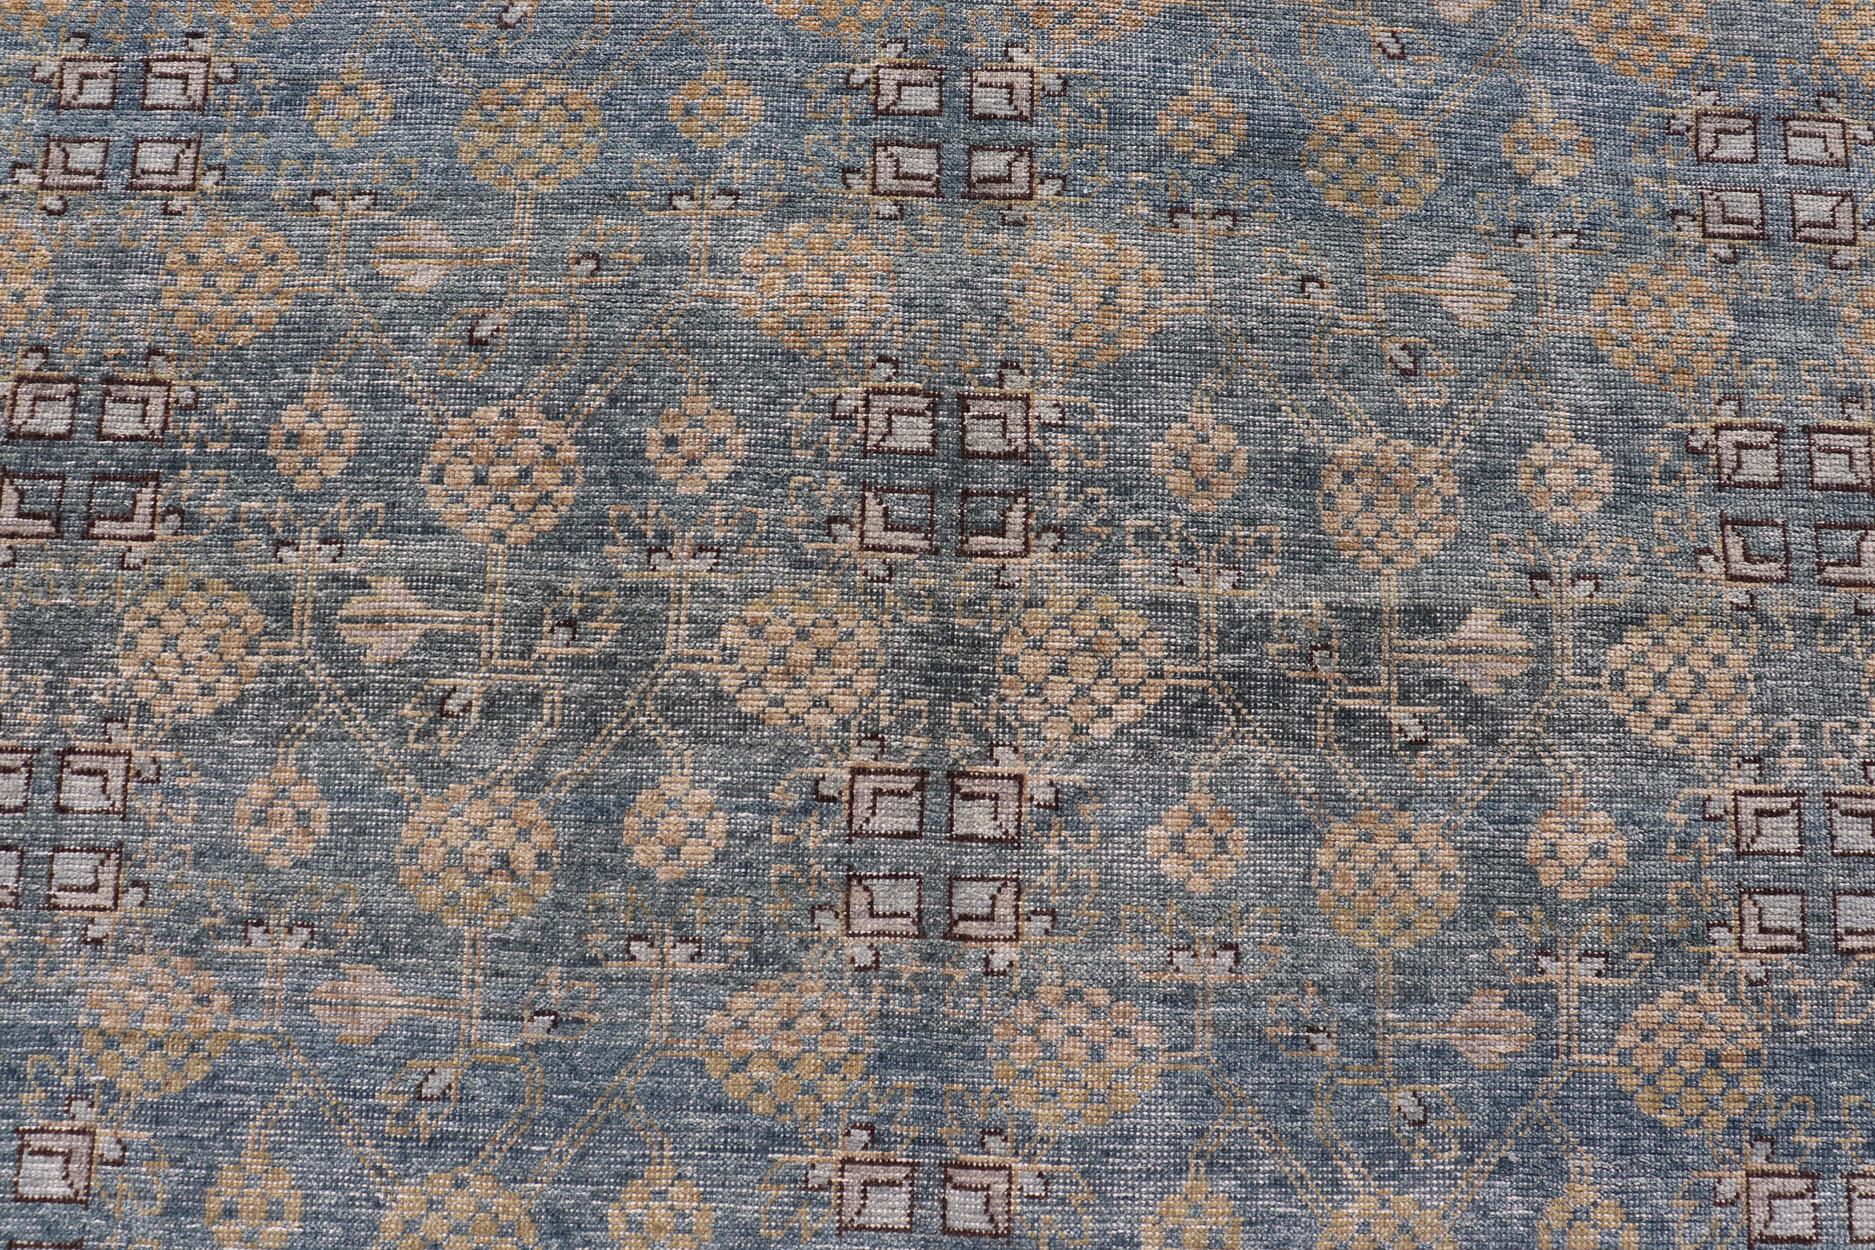 Modern All-Over Tribal Motif Khotan Area Rug in Dark Blues, Brown and Cream. Country of Origin: Afghanistan; Type: Khotan; Design: Floral, All-Over; Keivan Woven Arts: rug/PUR-42561. 
Measures: 12'1 x 15'1 
This modern Khotan features a modern dark